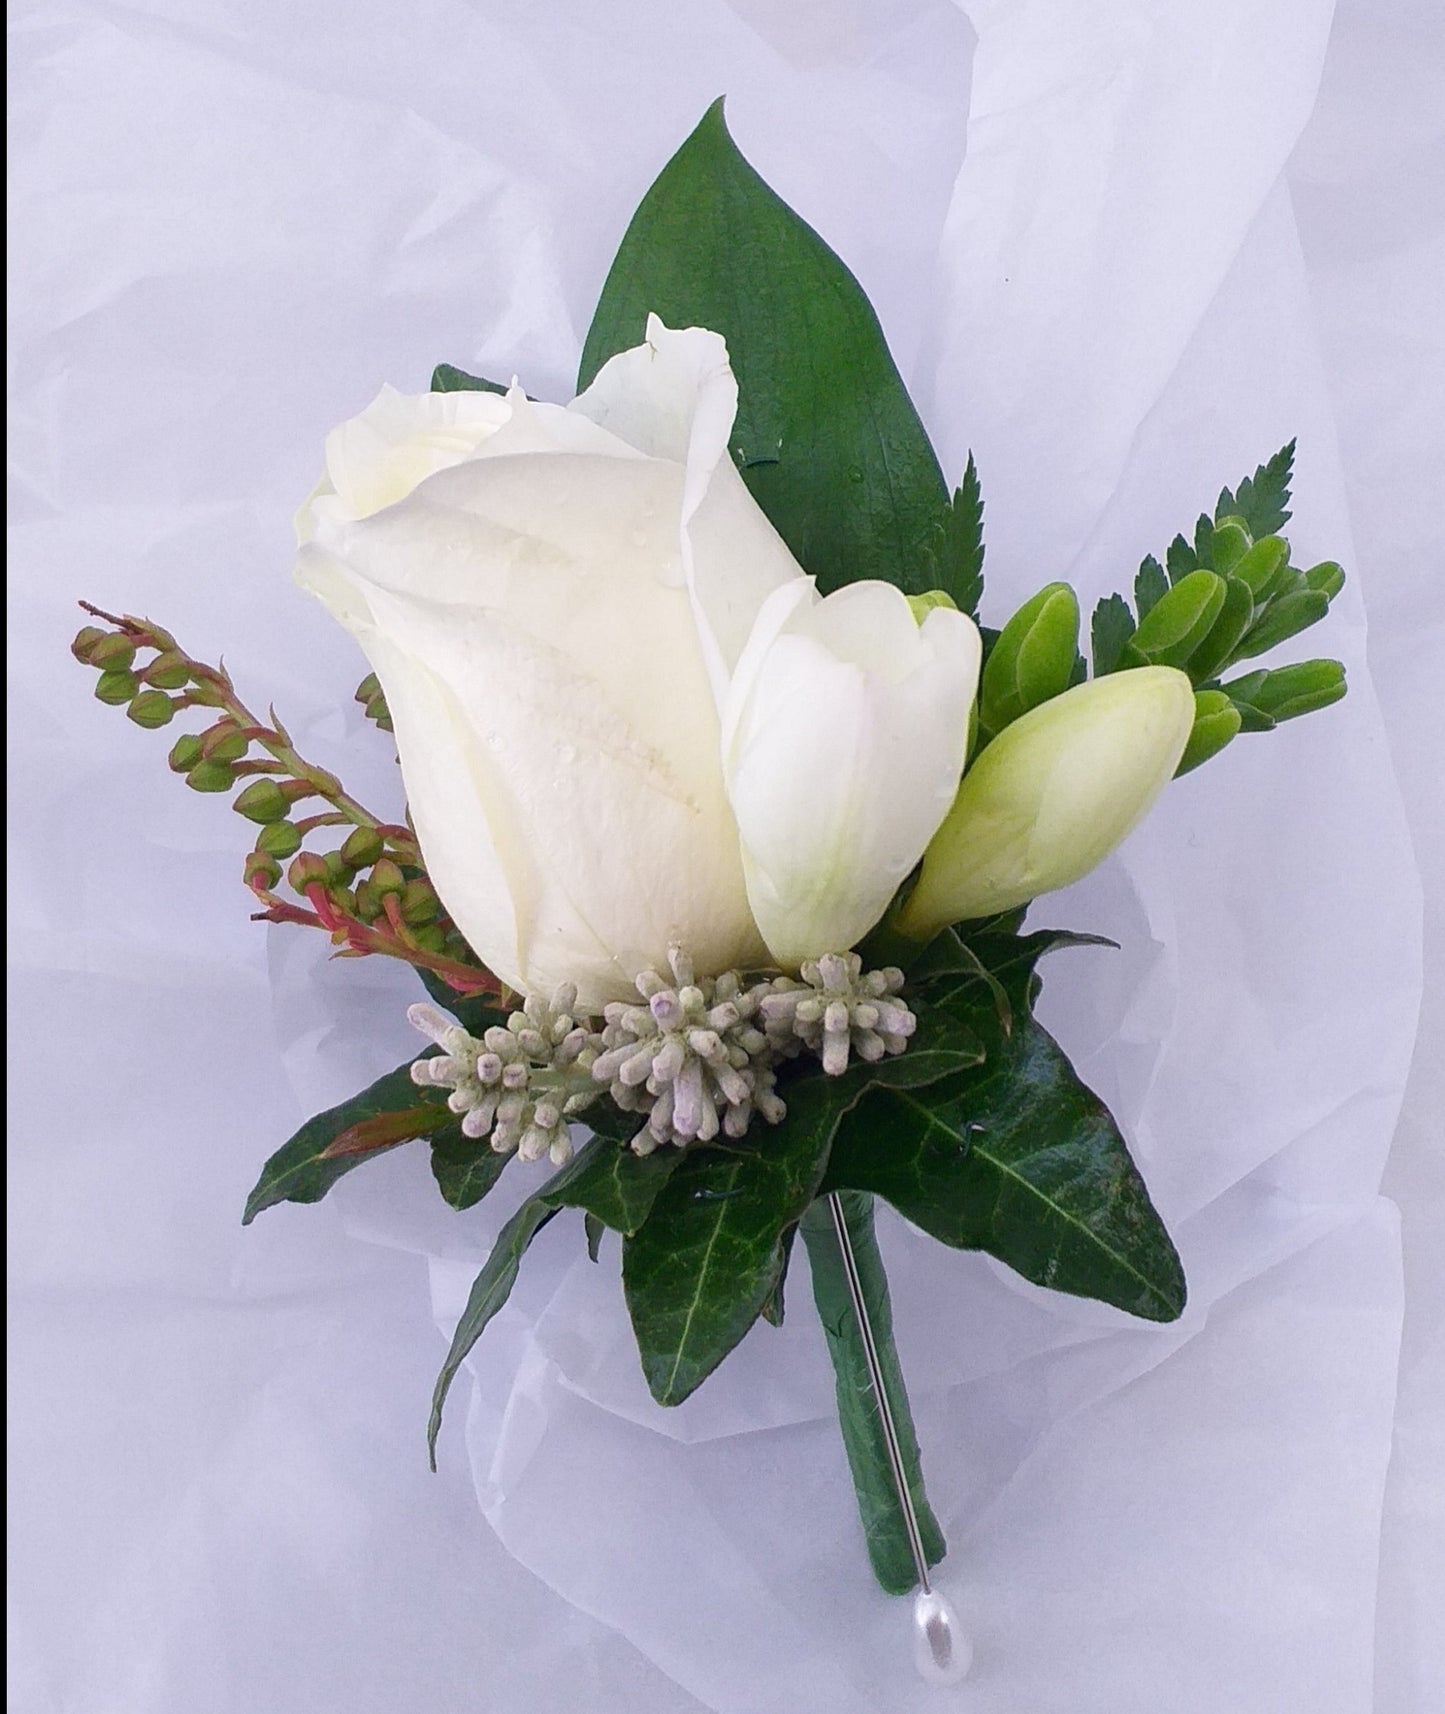 Buttonhole, white rose, small pieces of foliage, with leaves